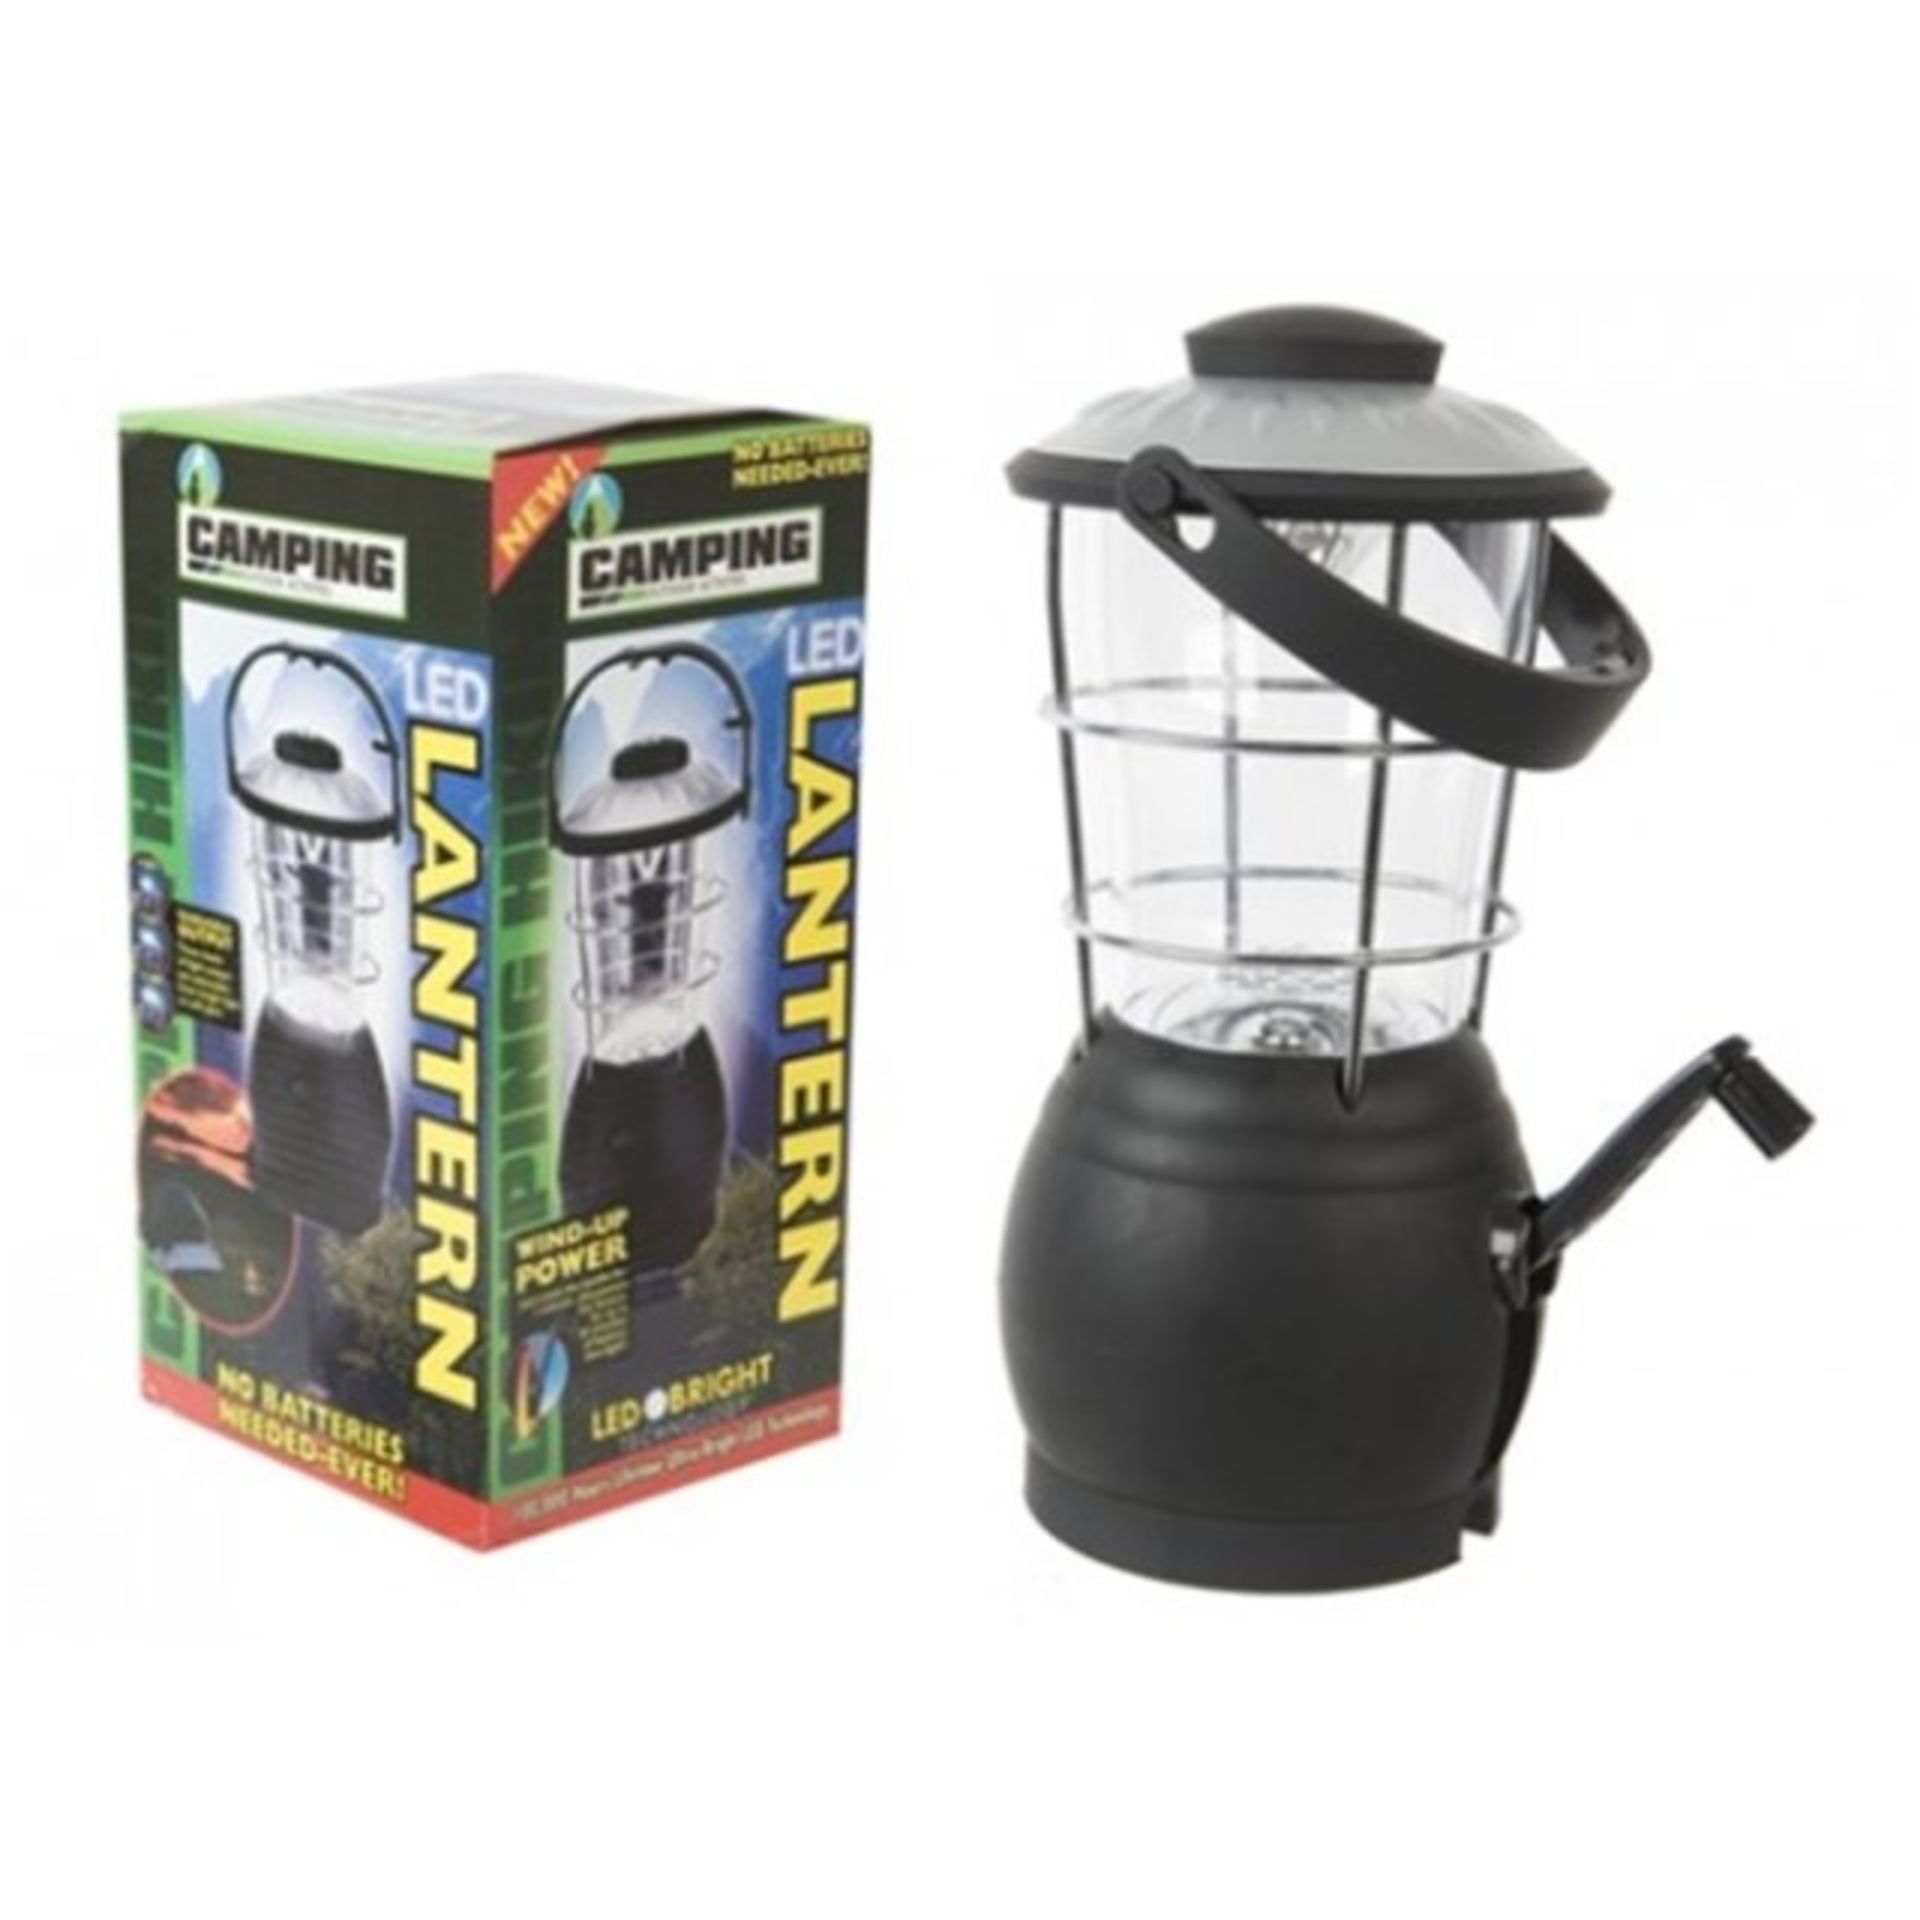 V Brand New 12 LED Wind Up Camping Lantern In Box RRP24.99 X 2 YOUR BID PRICE TO BE MULTIPLIED BY